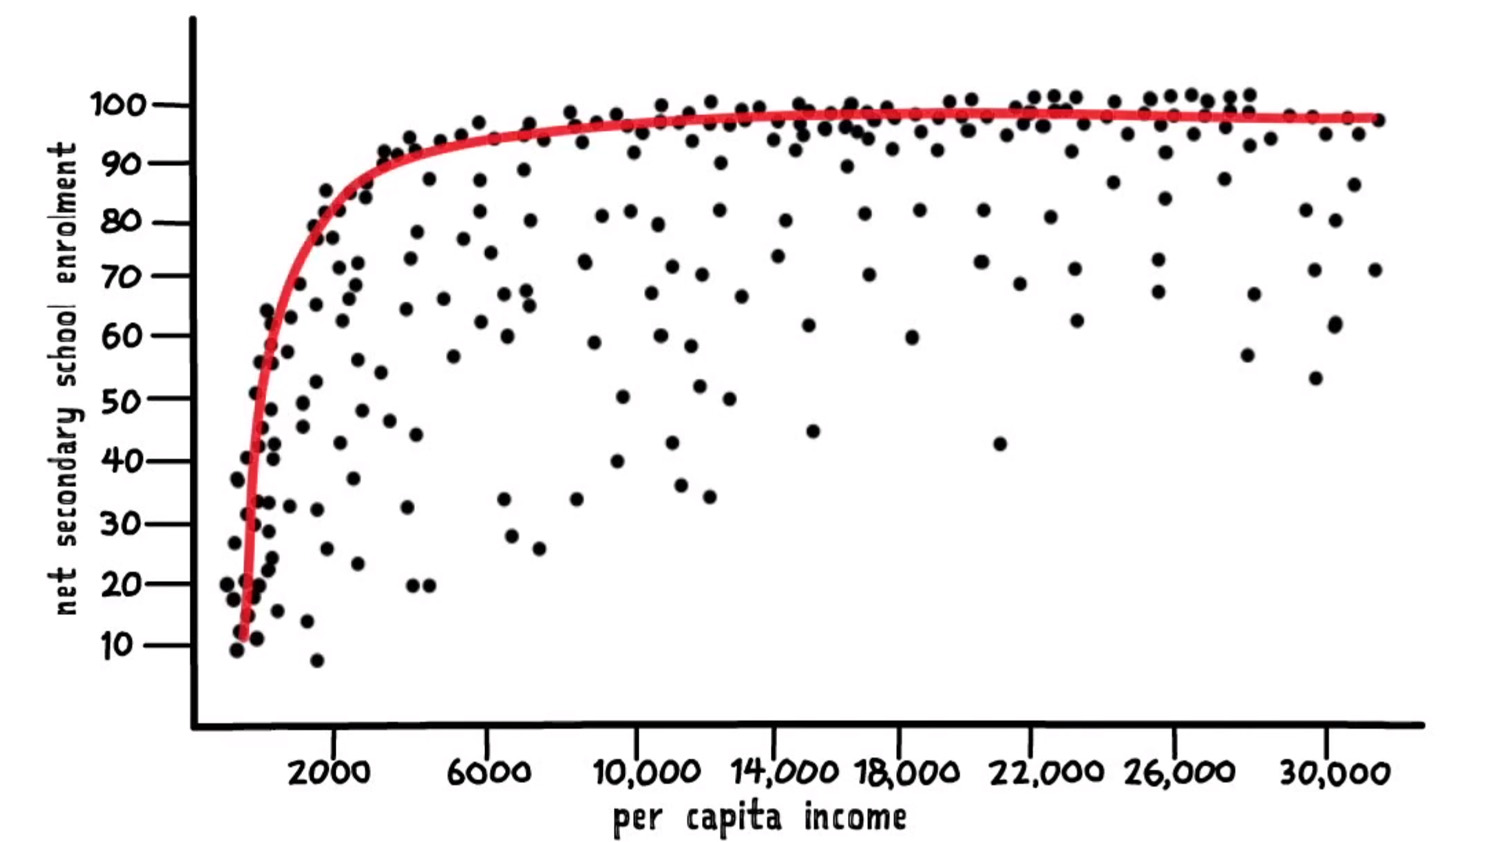 Scatter plot with per capita income on the horizontal and net secondary schoool enrolment on the vertical axis. A red curve envelopes the points from above.